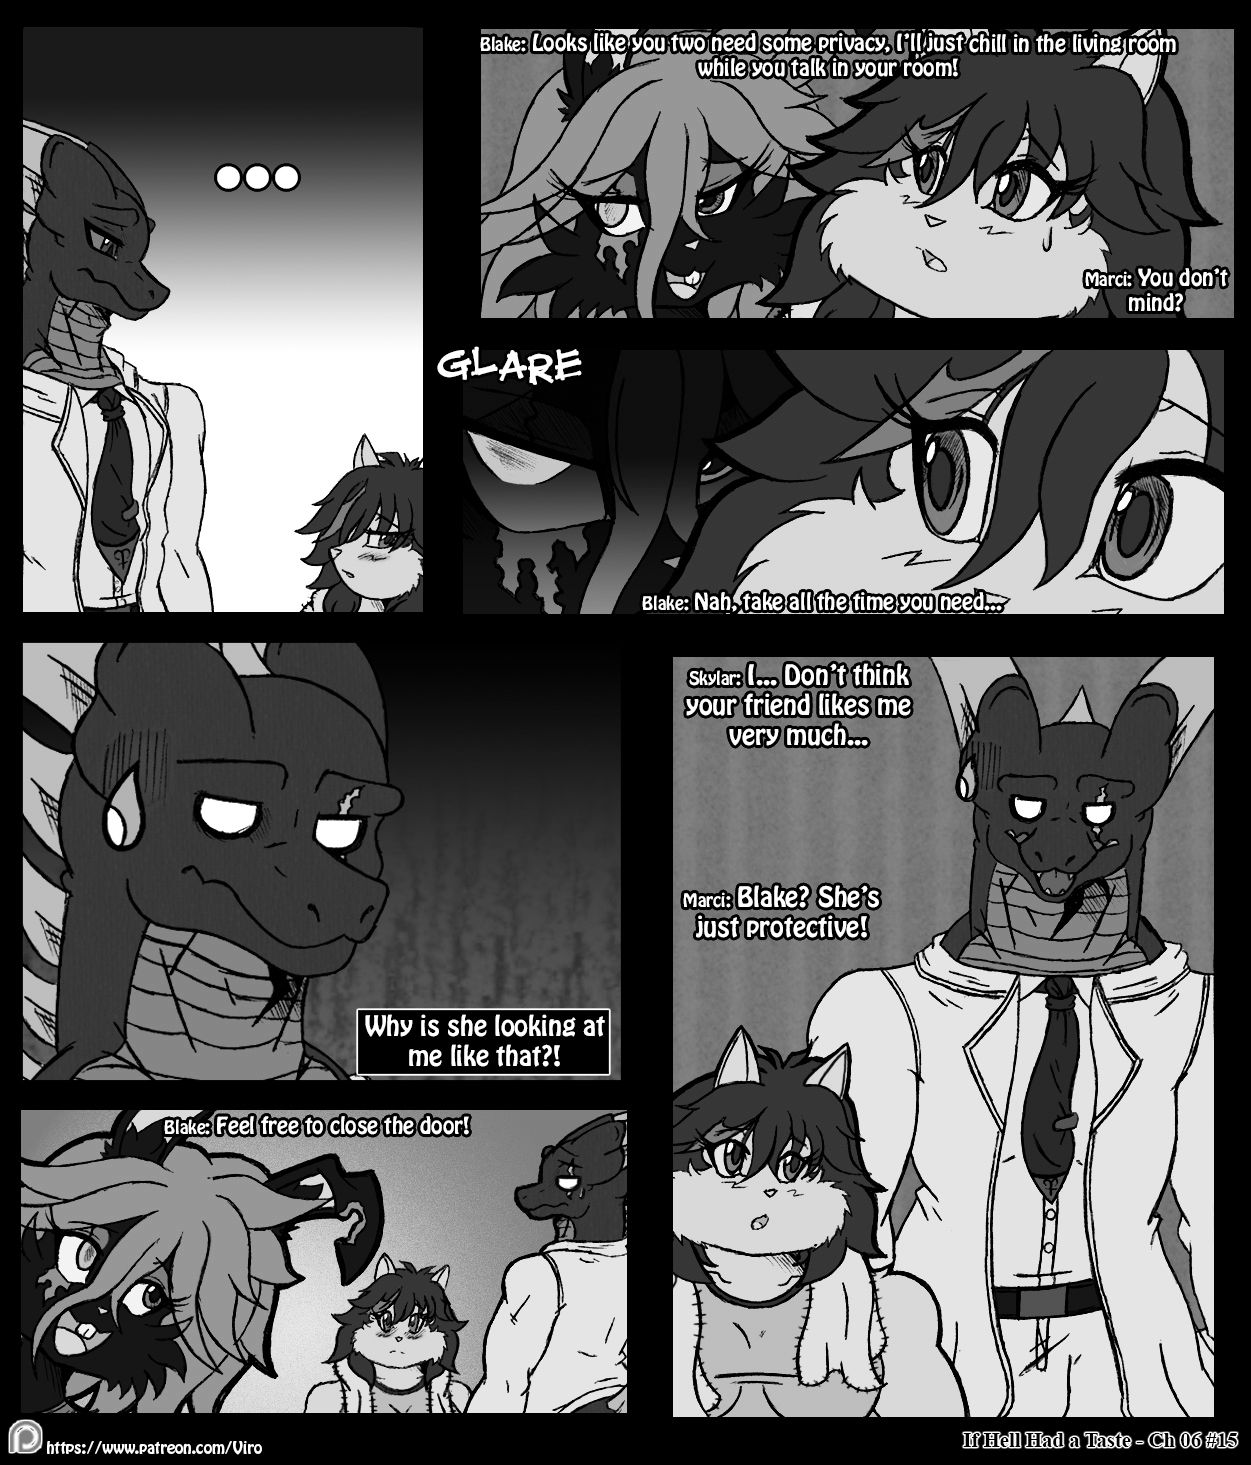 [Viro] If Hell Had a Taste Chapter 6 [Ongoing] 16